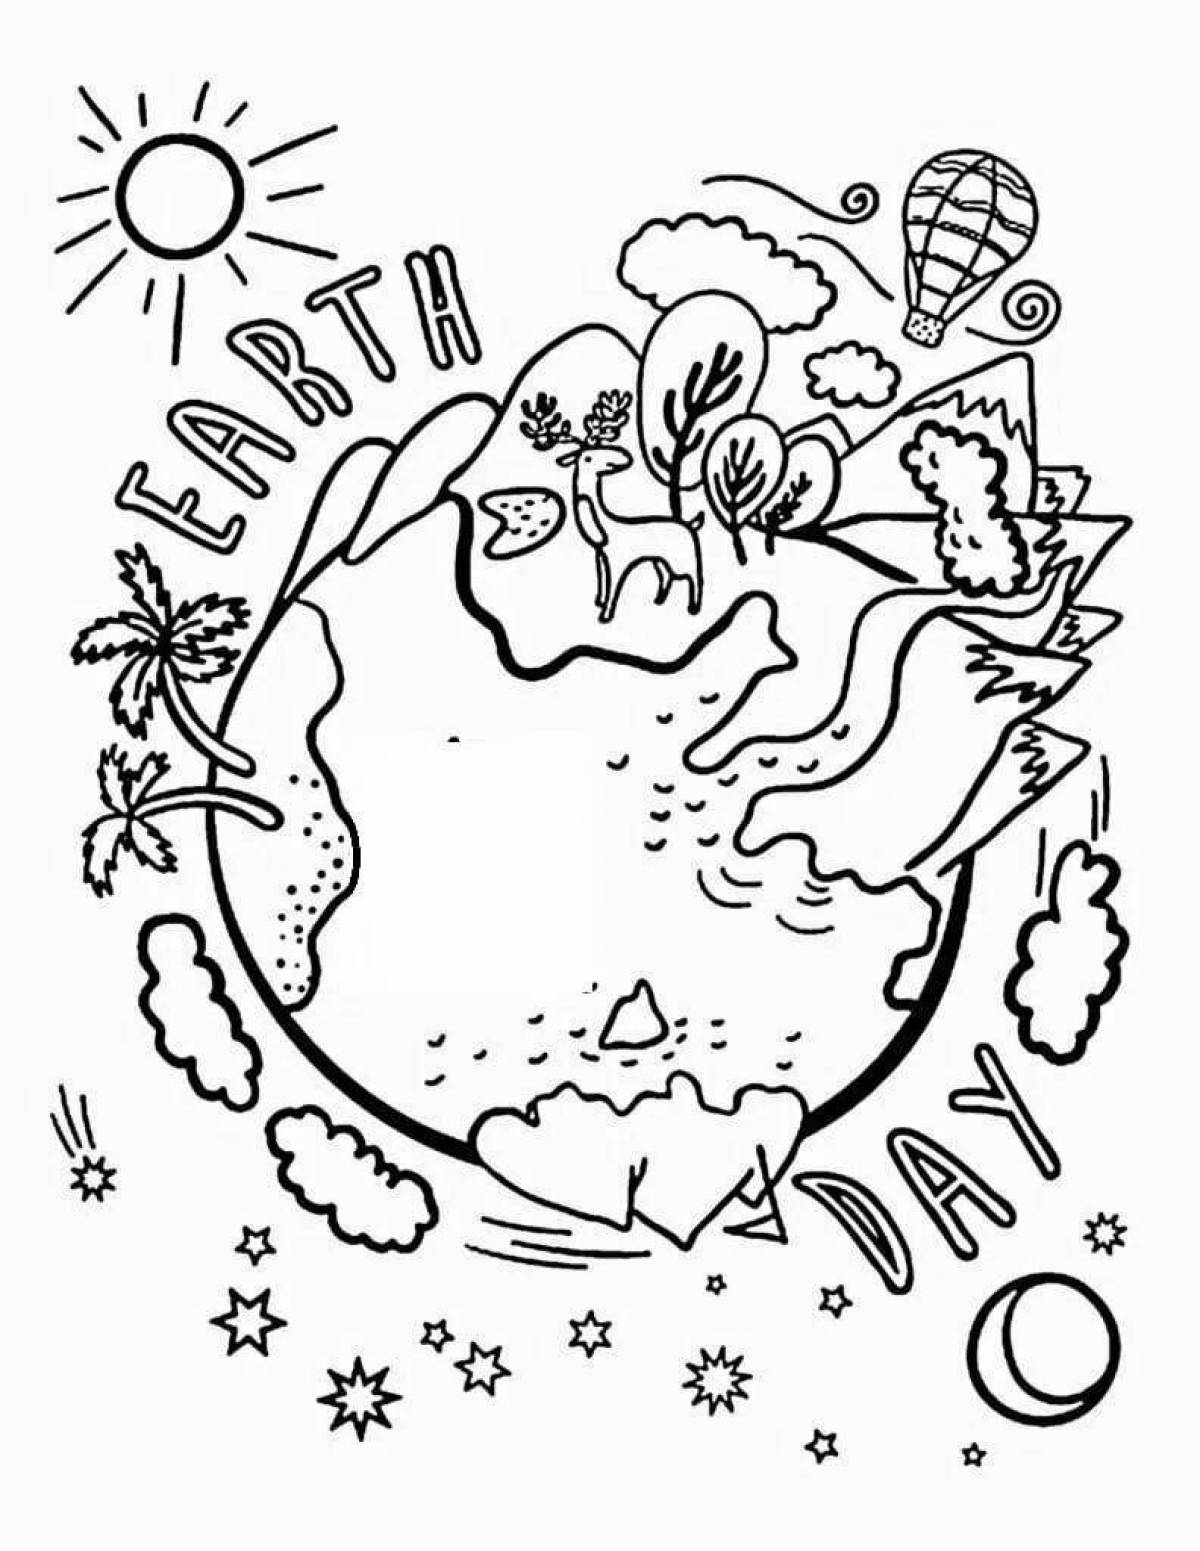 Glorious world on earth coloring page